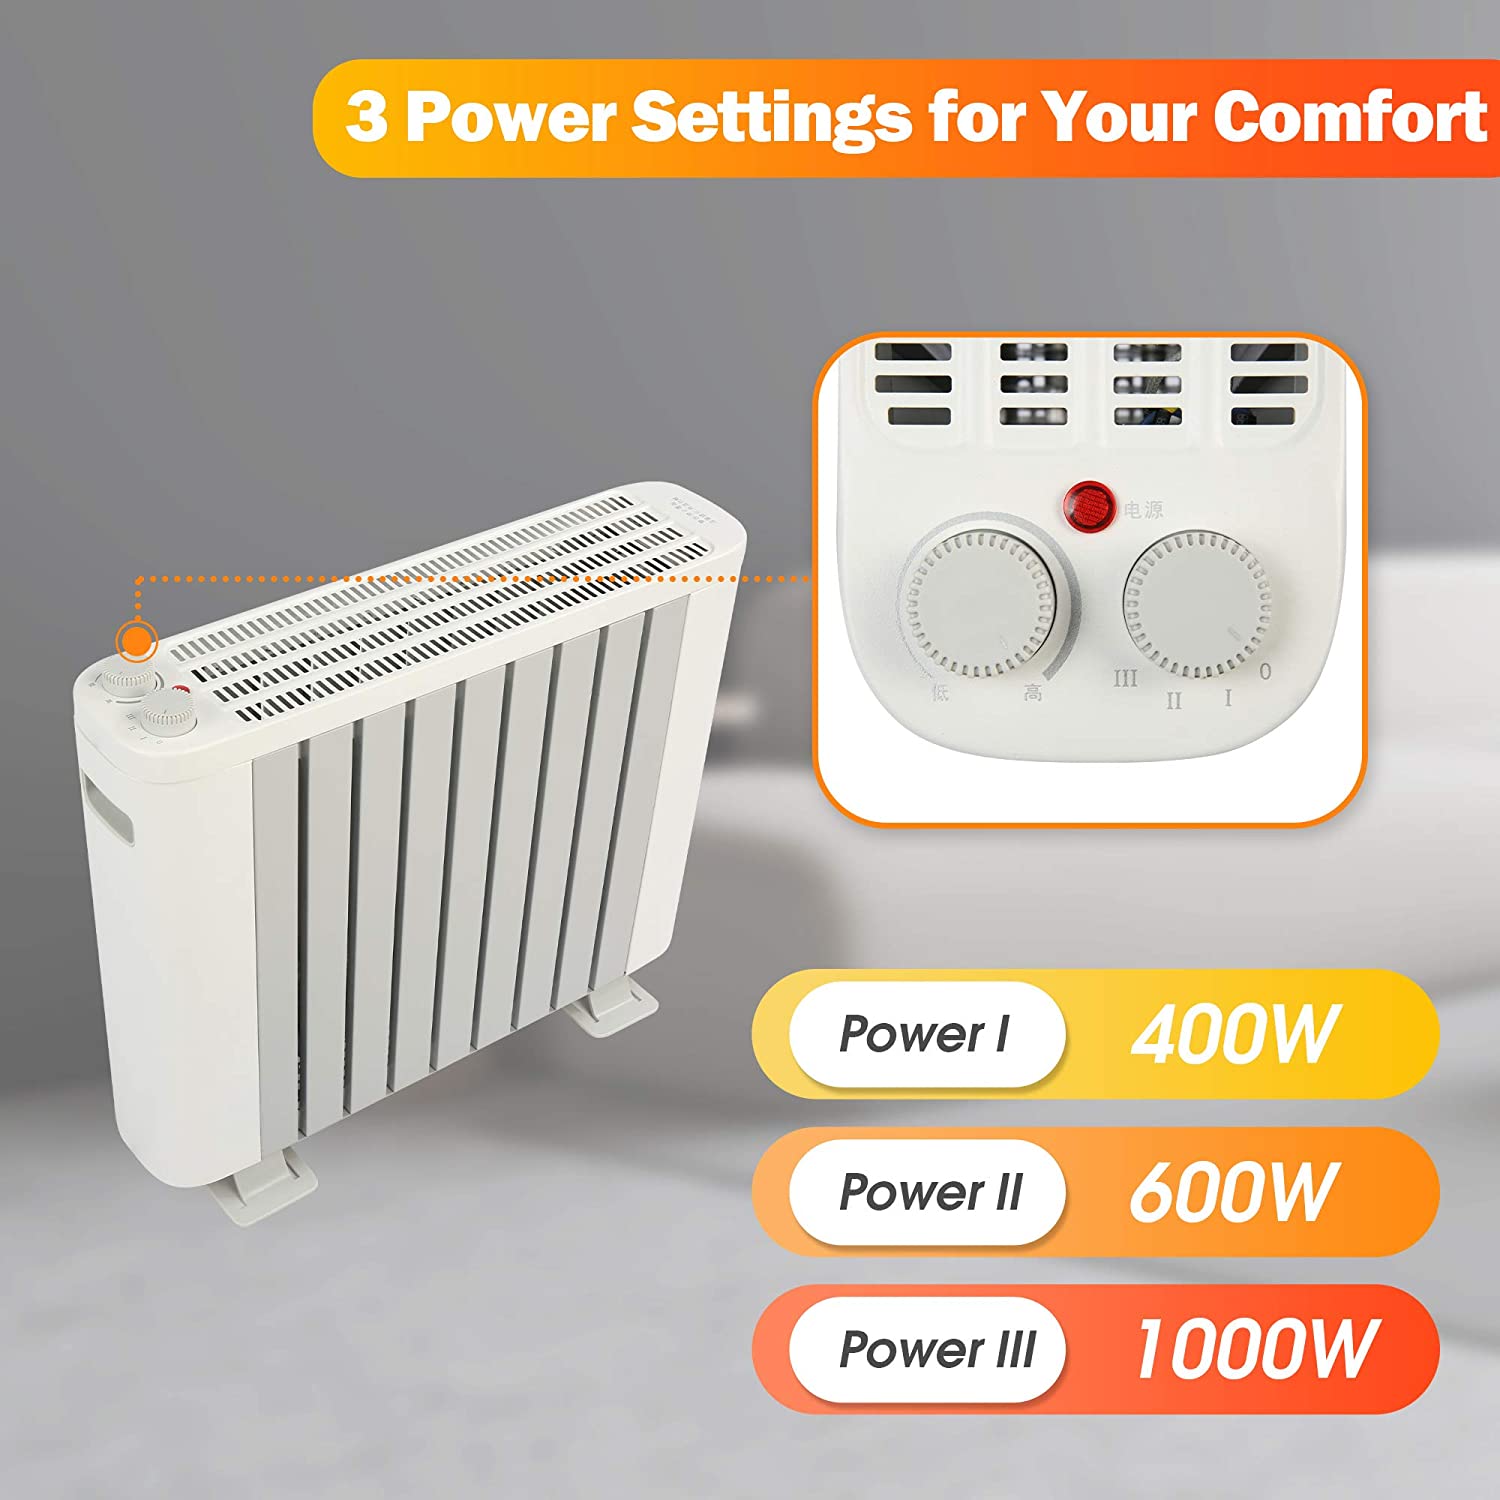 1000W Electric Space Heater with Silent Portable Adjustable Thermostat, 3 Heat Settings Convector Heater